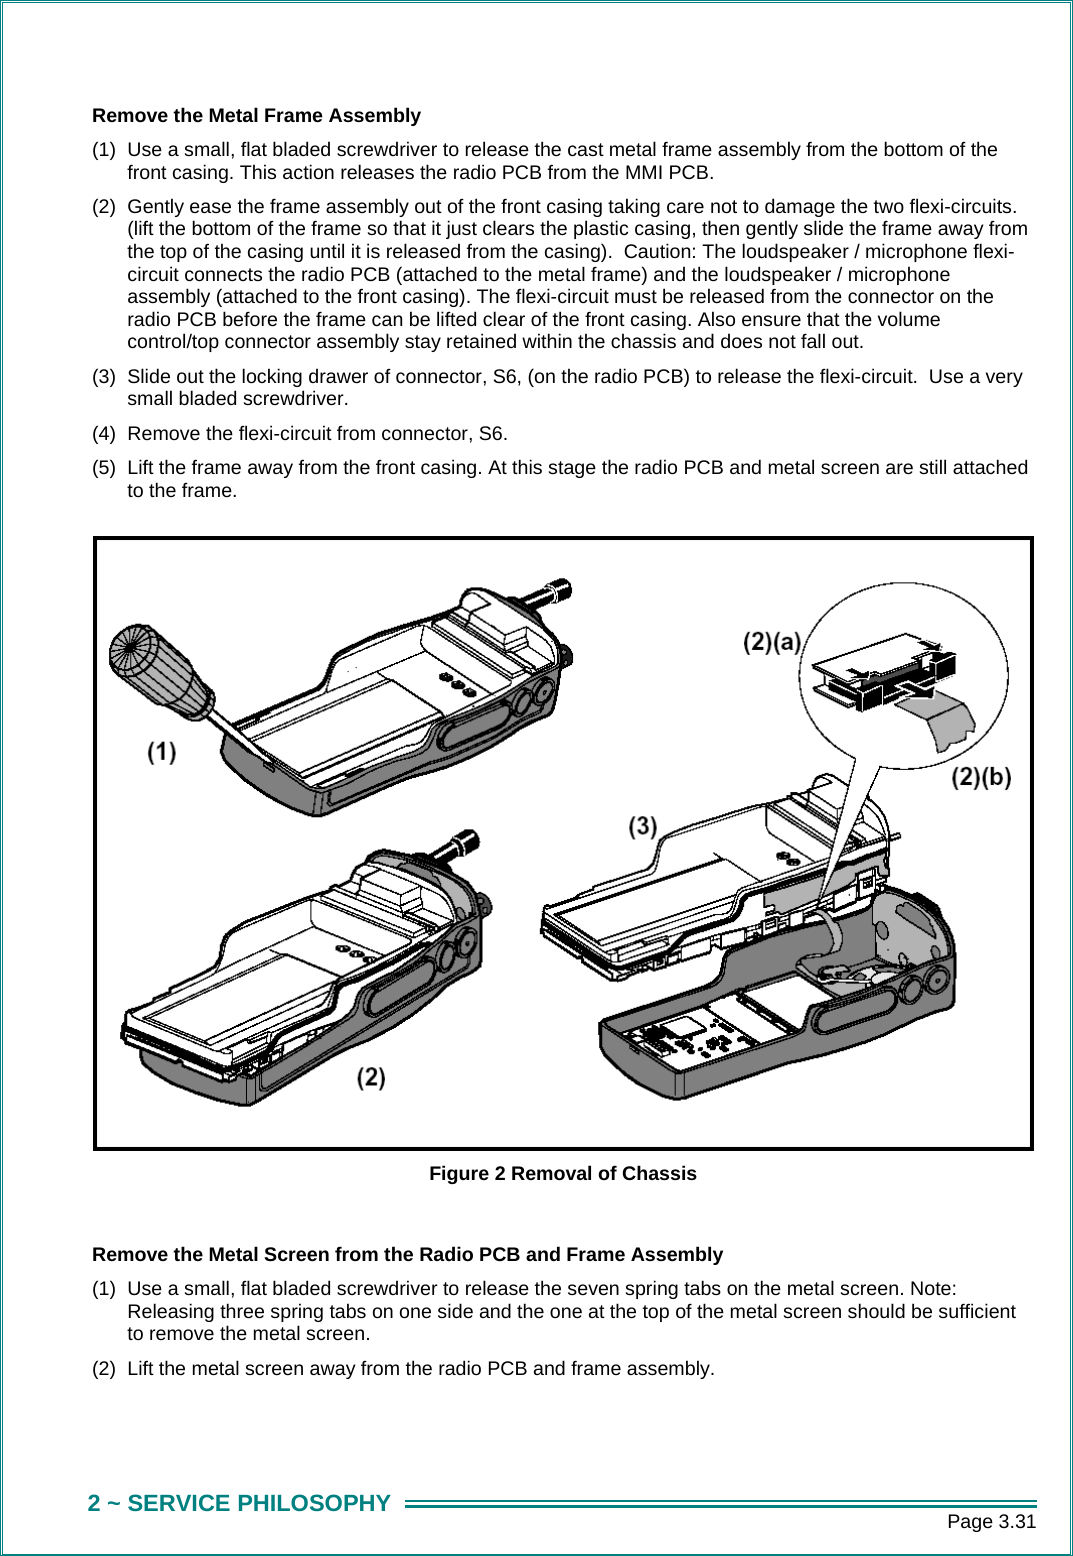      Page 3.31 2 ~ SERVICE PHILOSOPHY Remove the Metal Frame Assembly (1)  Use a small, flat bladed screwdriver to release the cast metal frame assembly from the bottom of the front casing. This action releases the radio PCB from the MMI PCB. (2)  Gently ease the frame assembly out of the front casing taking care not to damage the two flexi-circuits. (lift the bottom of the frame so that it just clears the plastic casing, then gently slide the frame away from the top of the casing until it is released from the casing).  Caution: The loudspeaker / microphone flexi-circuit connects the radio PCB (attached to the metal frame) and the loudspeaker / microphone assembly (attached to the front casing). The flexi-circuit must be released from the connector on the radio PCB before the frame can be lifted clear of the front casing. Also ensure that the volume control/top connector assembly stay retained within the chassis and does not fall out. (3)  Slide out the locking drawer of connector, S6, (on the radio PCB) to release the flexi-circuit.  Use a very small bladed screwdriver. (4)  Remove the flexi-circuit from connector, S6. (5)  Lift the frame away from the front casing. At this stage the radio PCB and metal screen are still attached to the frame.  Figure 2 Removal of Chassis  Remove the Metal Screen from the Radio PCB and Frame Assembly (1)  Use a small, flat bladed screwdriver to release the seven spring tabs on the metal screen. Note: Releasing three spring tabs on one side and the one at the top of the metal screen should be sufficient to remove the metal screen.  (2)  Lift the metal screen away from the radio PCB and frame assembly.   